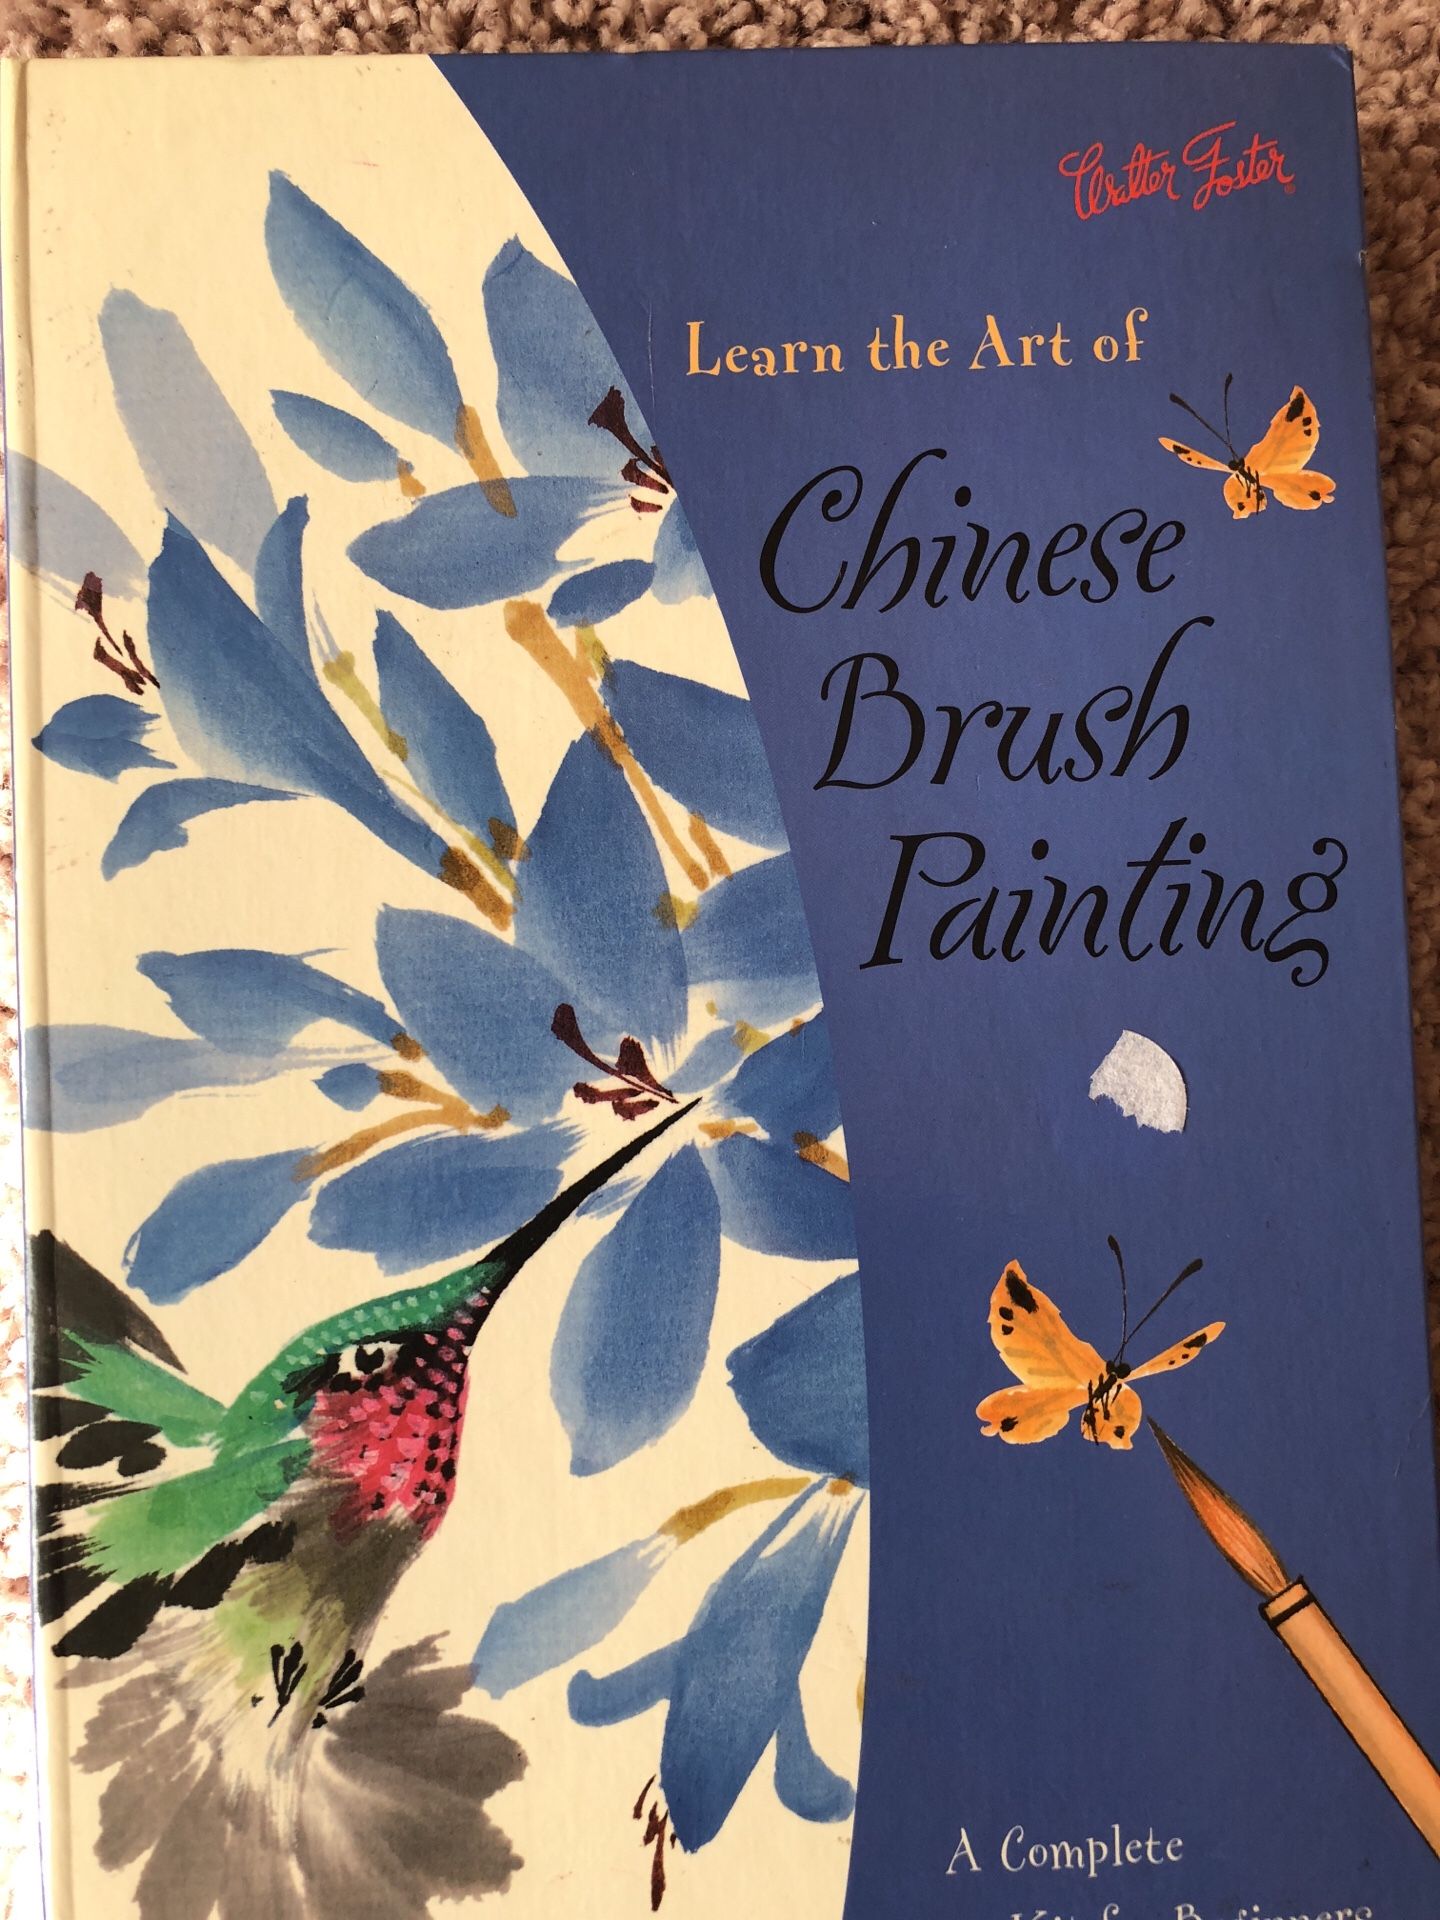 I complete kit for beginners Chinese brush painting